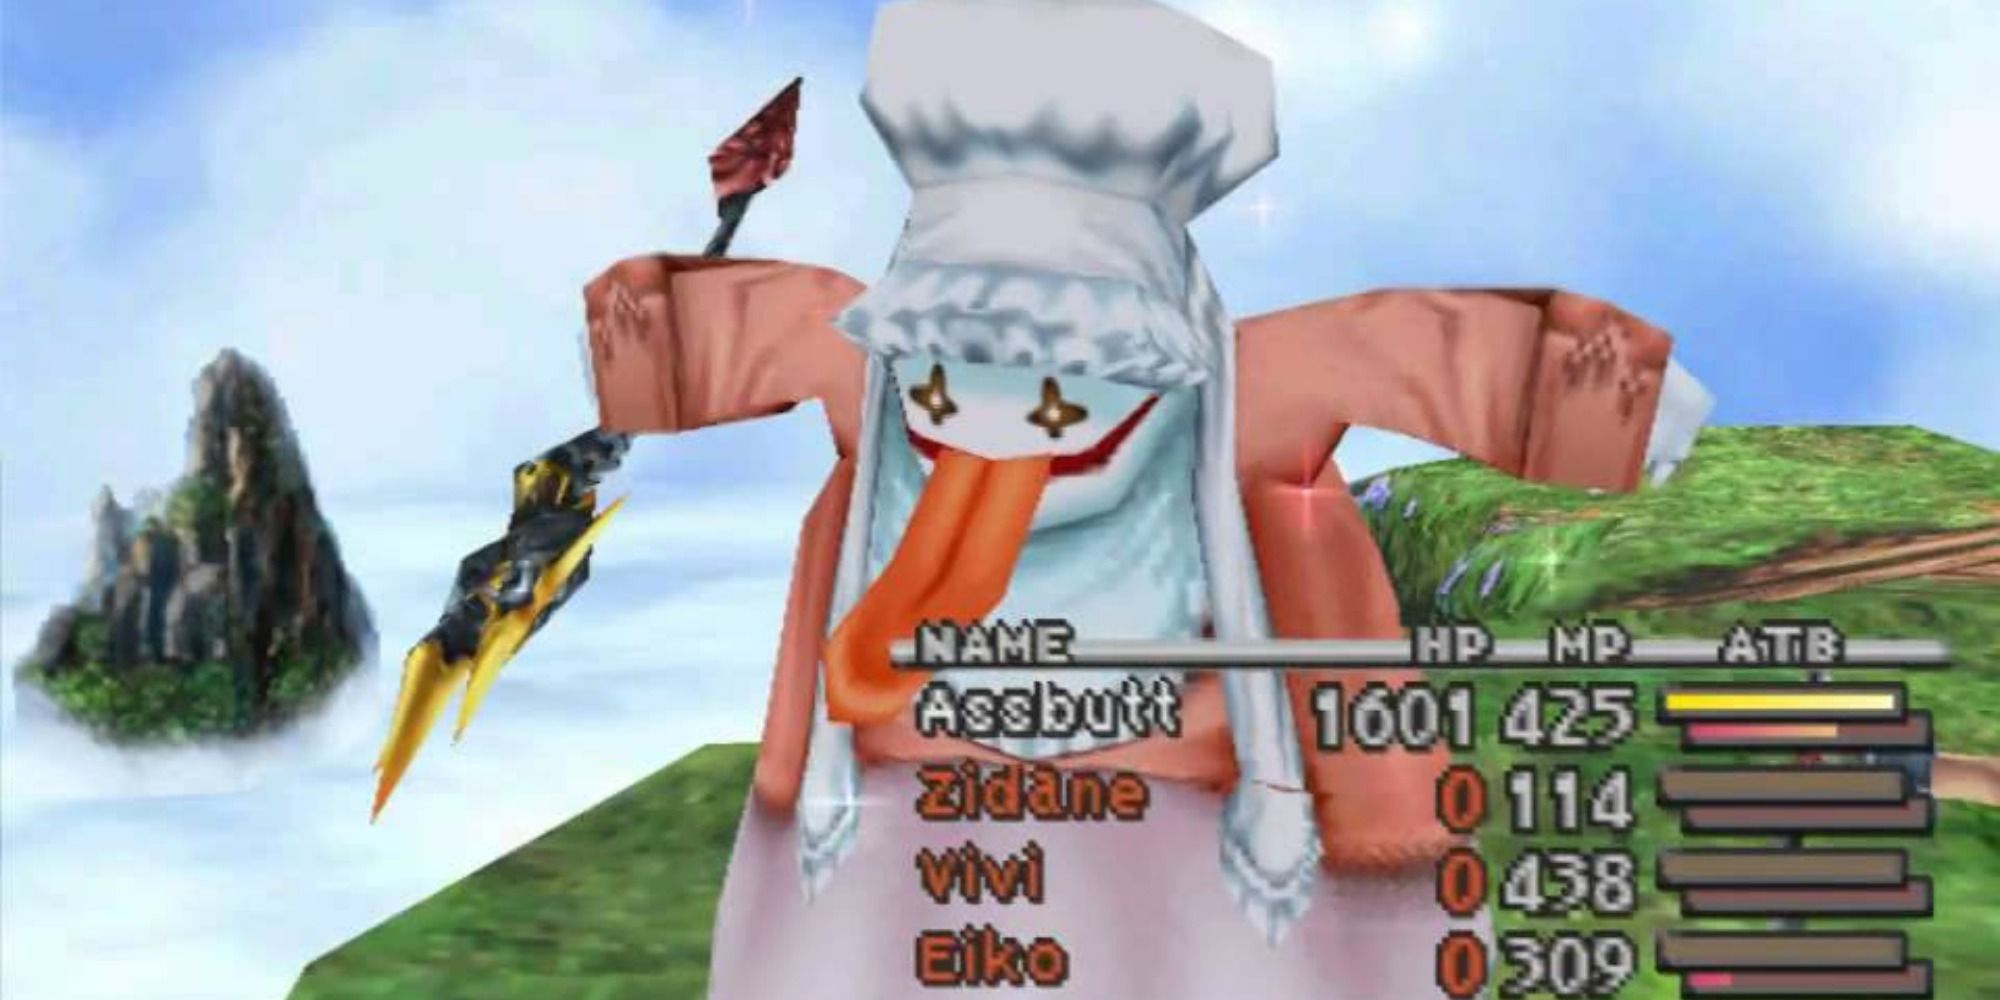 Quina casting a spell in Final Fantasy 9